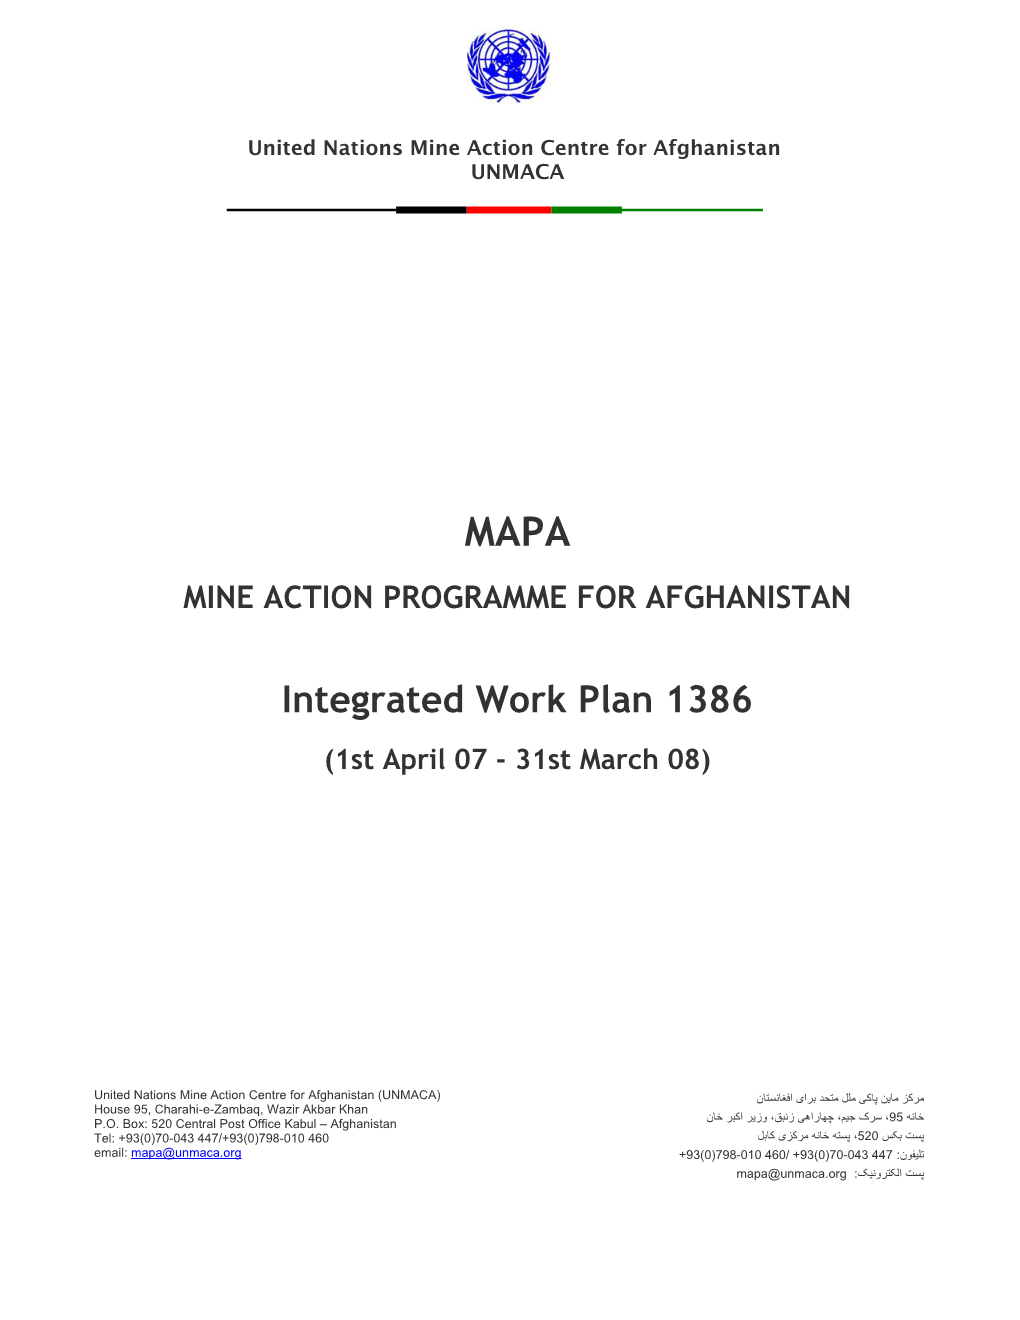 Integrated Work Plan 1386 (1St April 07 - 31St March 08)